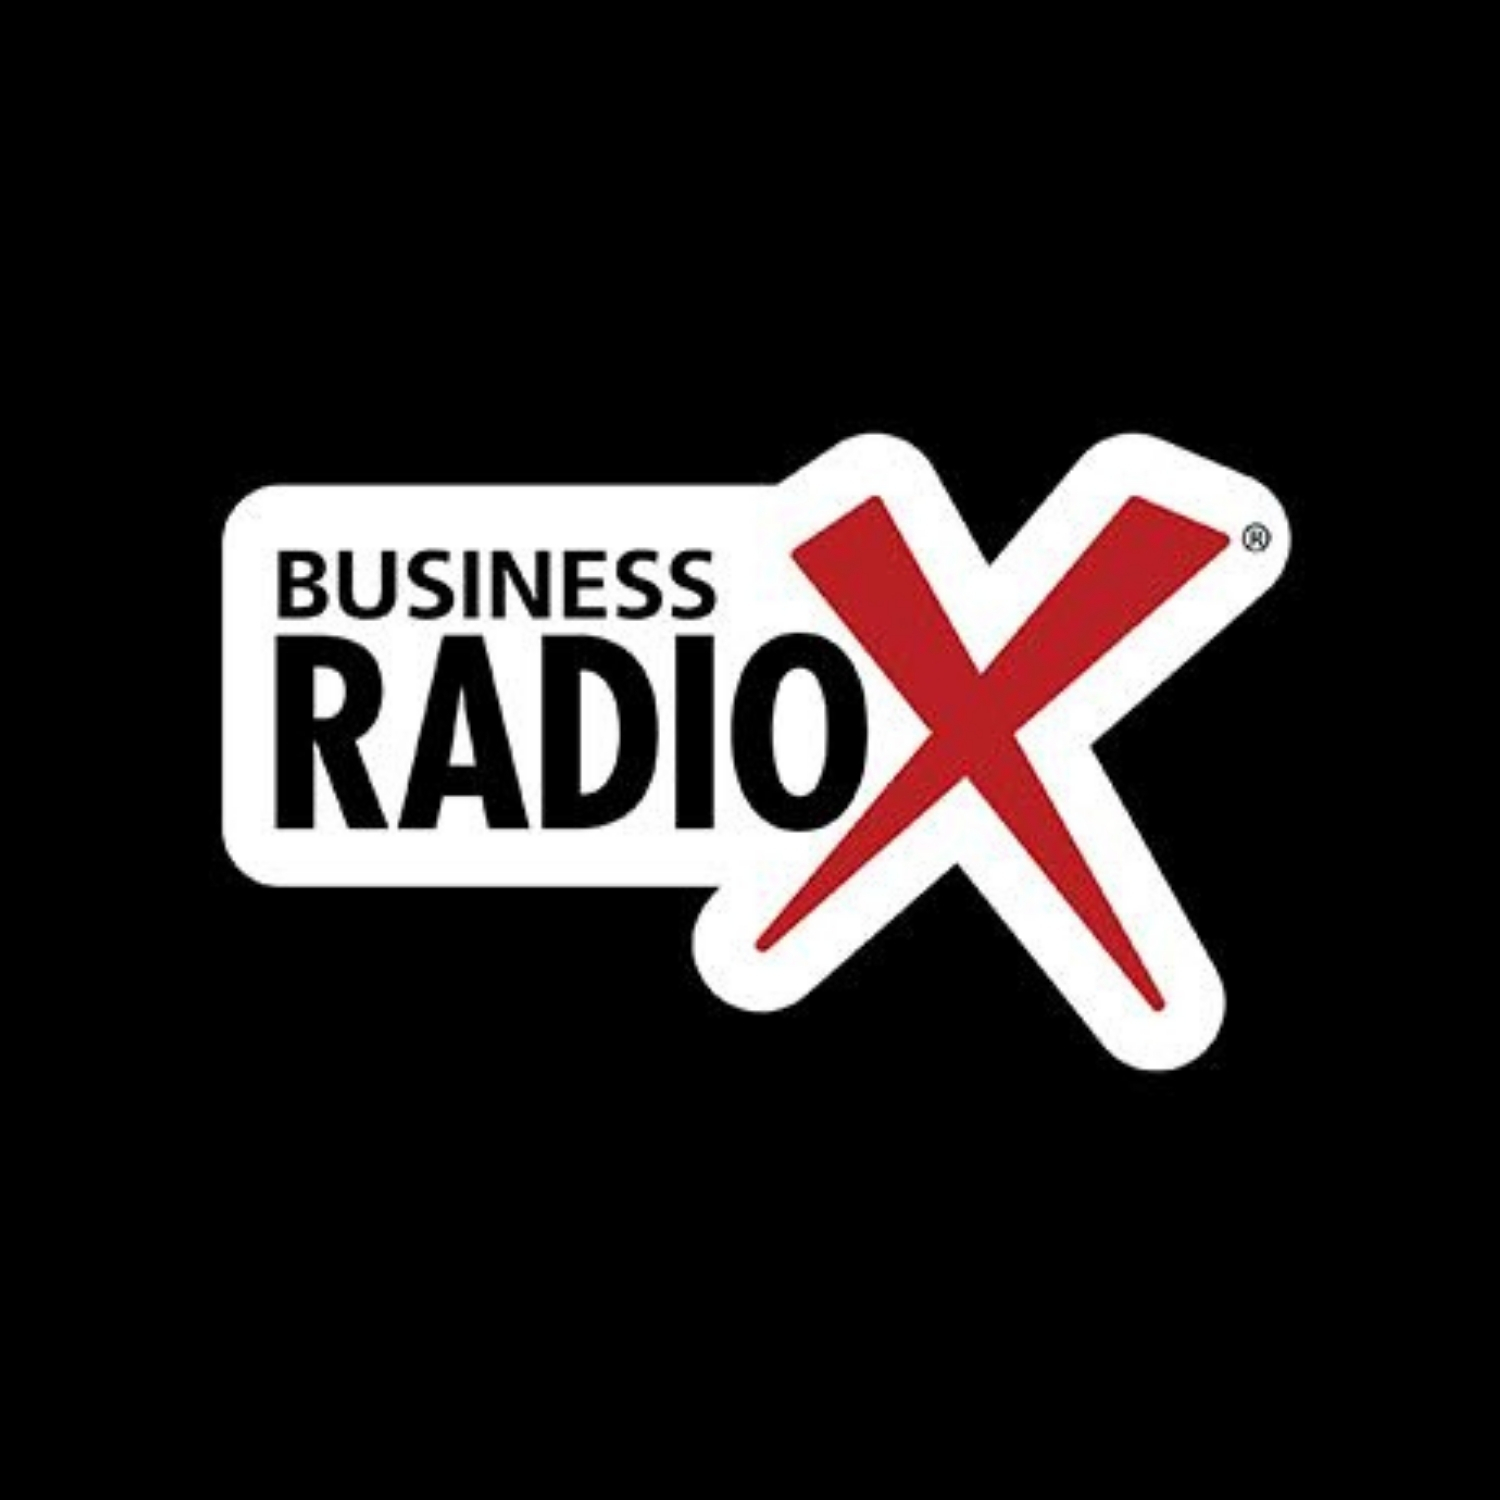 Cassius Butts and David Perry with U.S. Small Business Administration SBA, Drew Tonsmeire with Kennesaw State University SBDC, Stephen Pararo with Pineapple House Interior Design, Pete Canalichio with Licensing Brands – Buckhead Business Radio